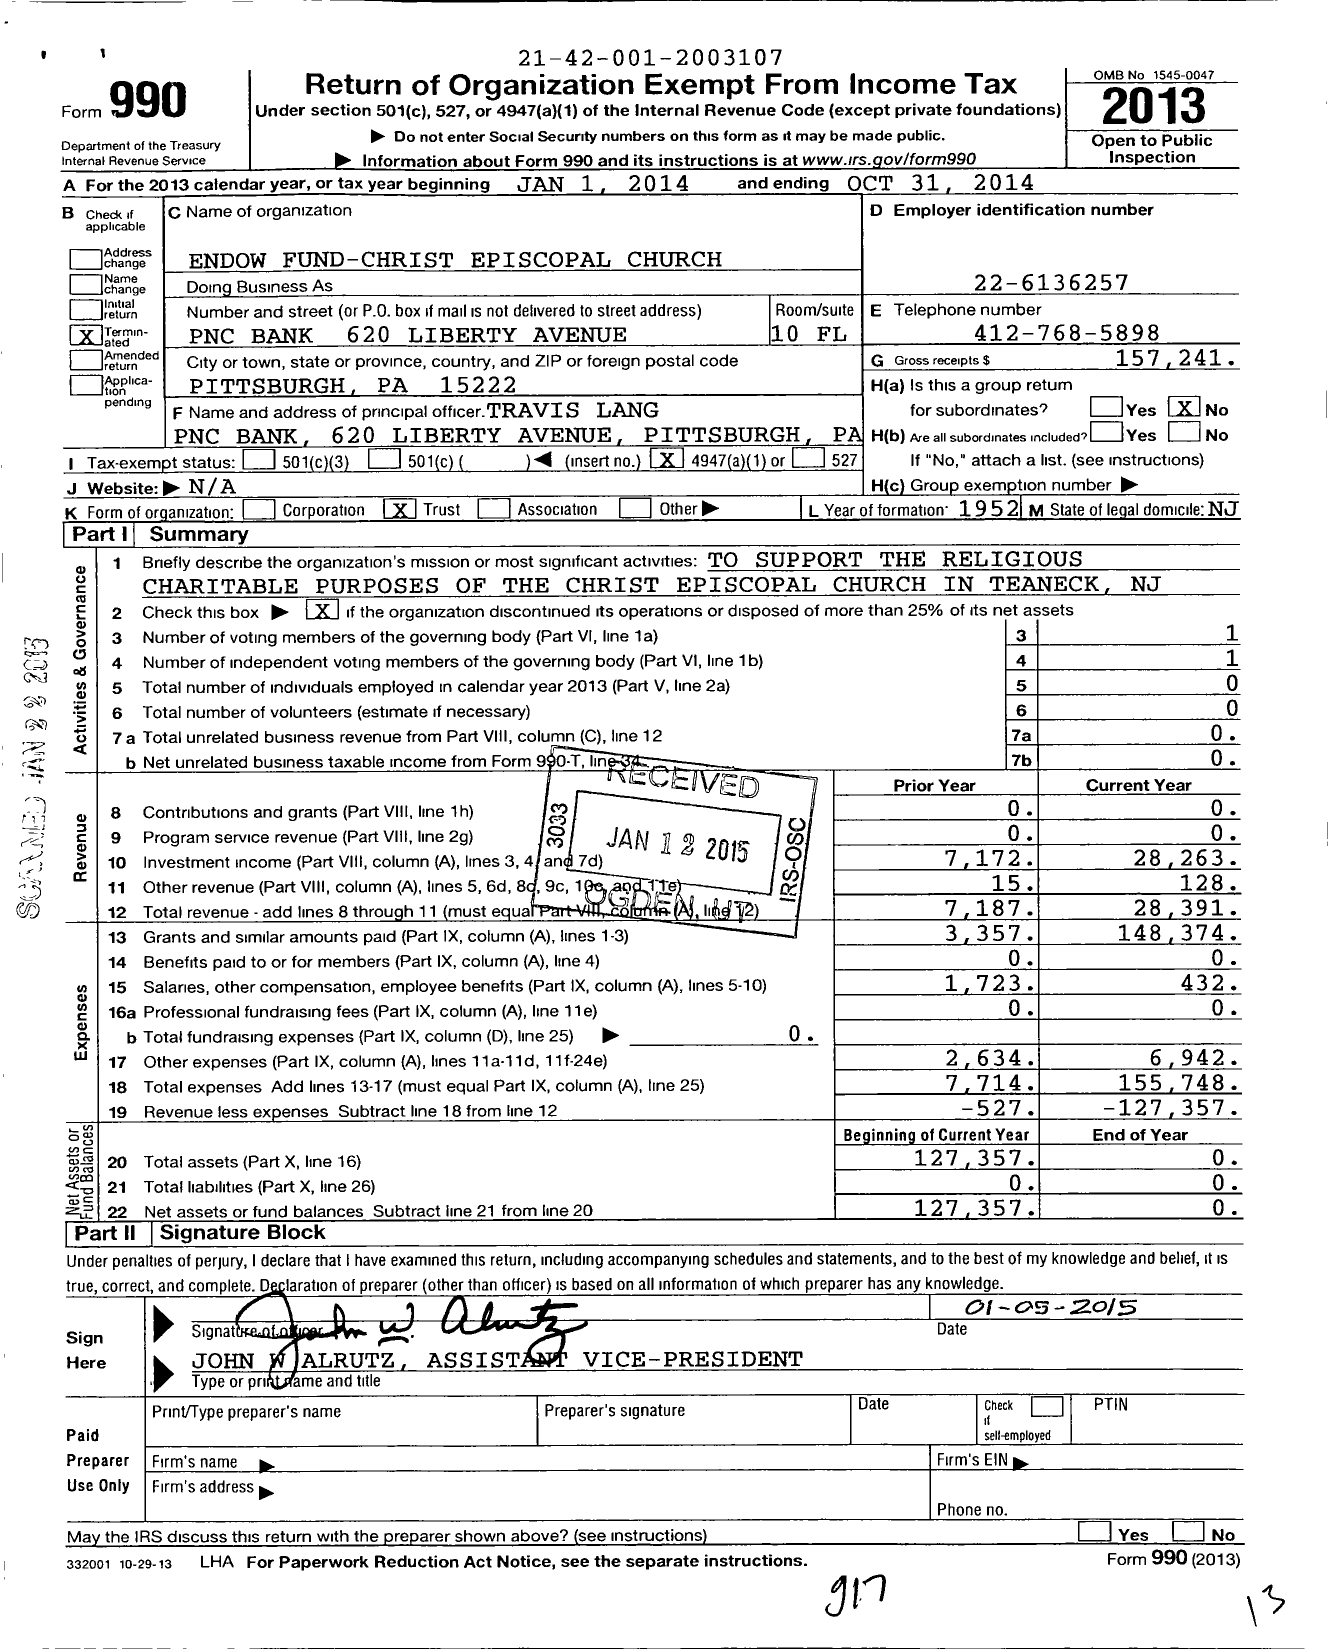 Image of first page of 2013 Form 990O for Endow Fund-Christ Episcopal Church